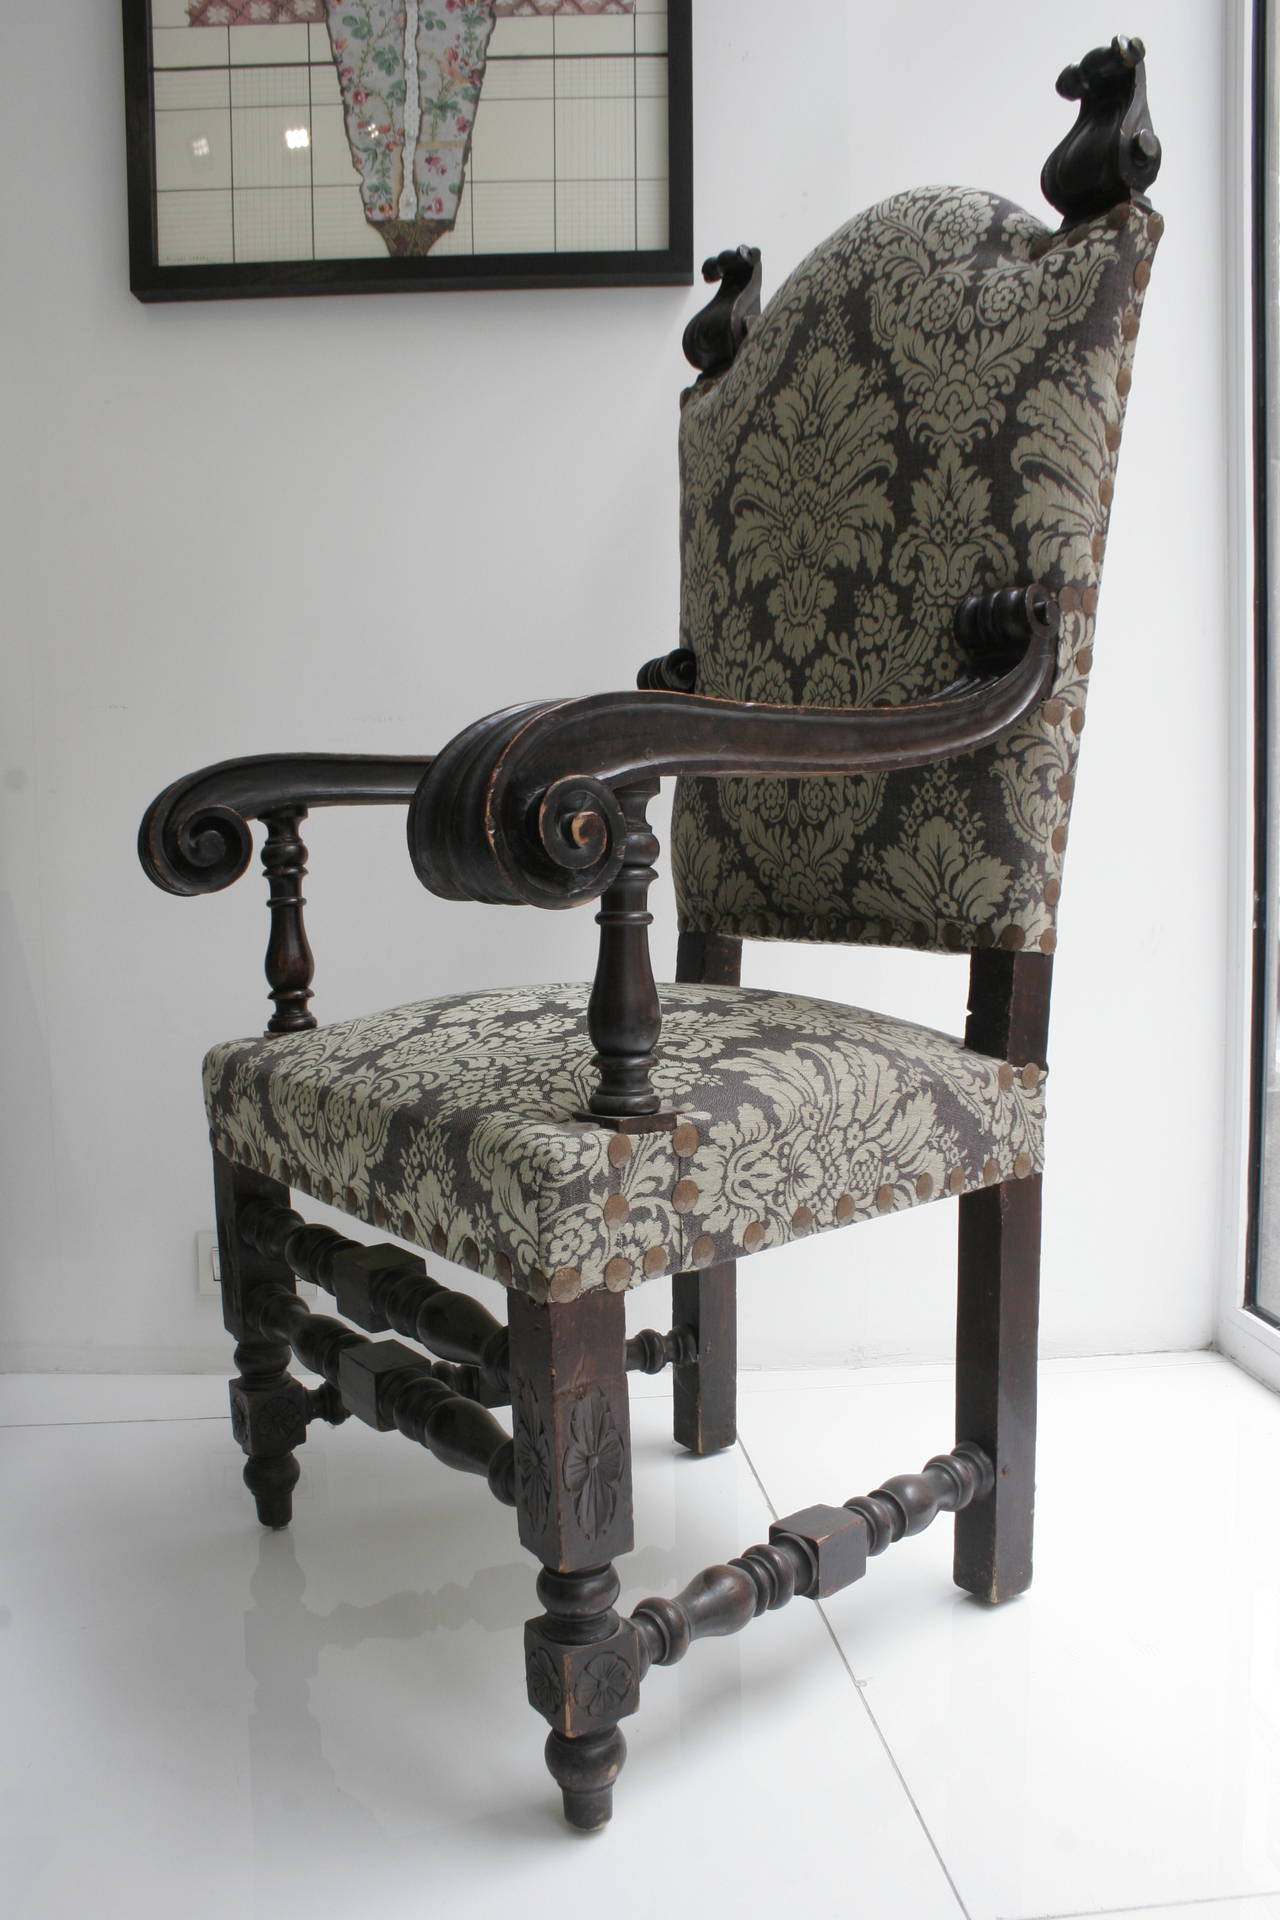 Pair of towering wooden armchairs blackened seats and seat covered with gray damask. Probably Spanish or Italian Baroque furniture, 19th century.